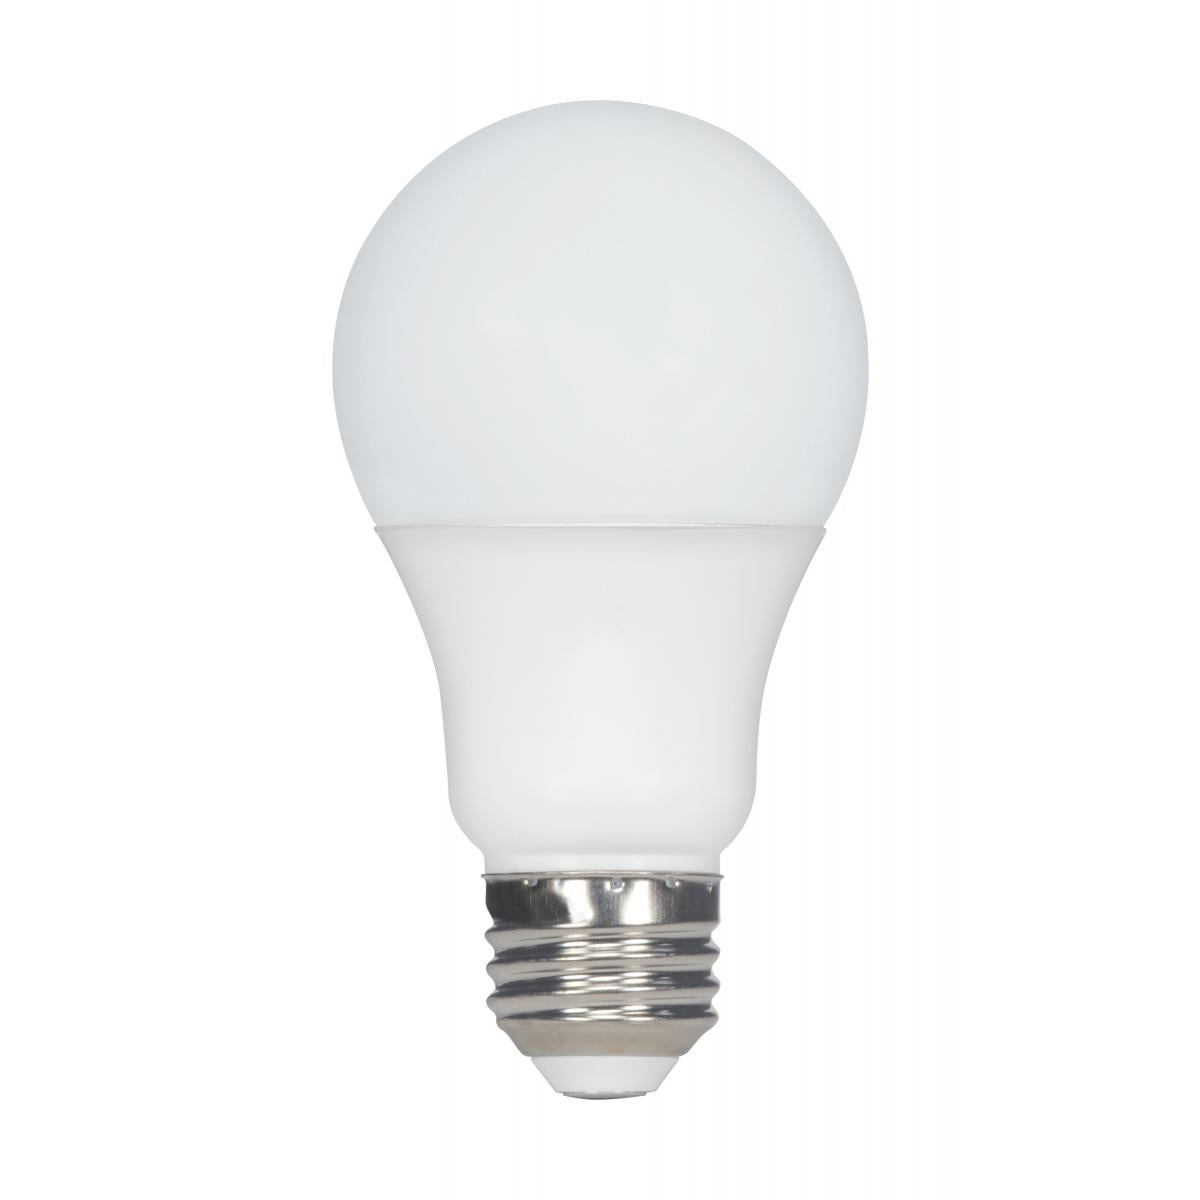 9.8W Non-Dimmable A19 Singles